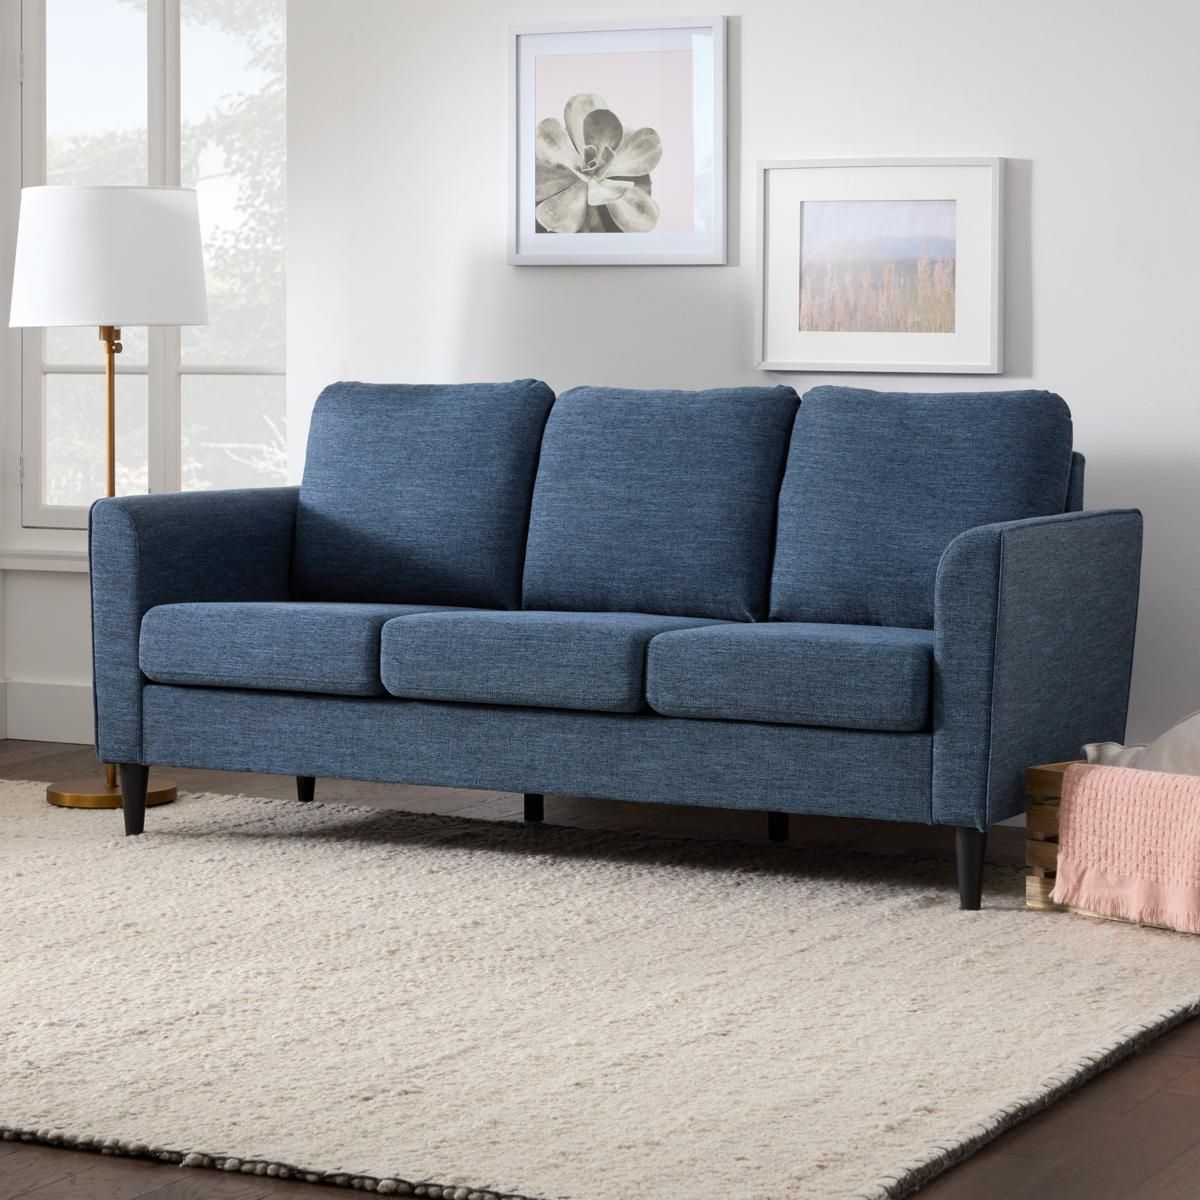 Brookside Clara 73” Upholstered Curved Arm Sofa – 20485462 | Hsn Within Sofas With Curved Arms (View 6 of 15)